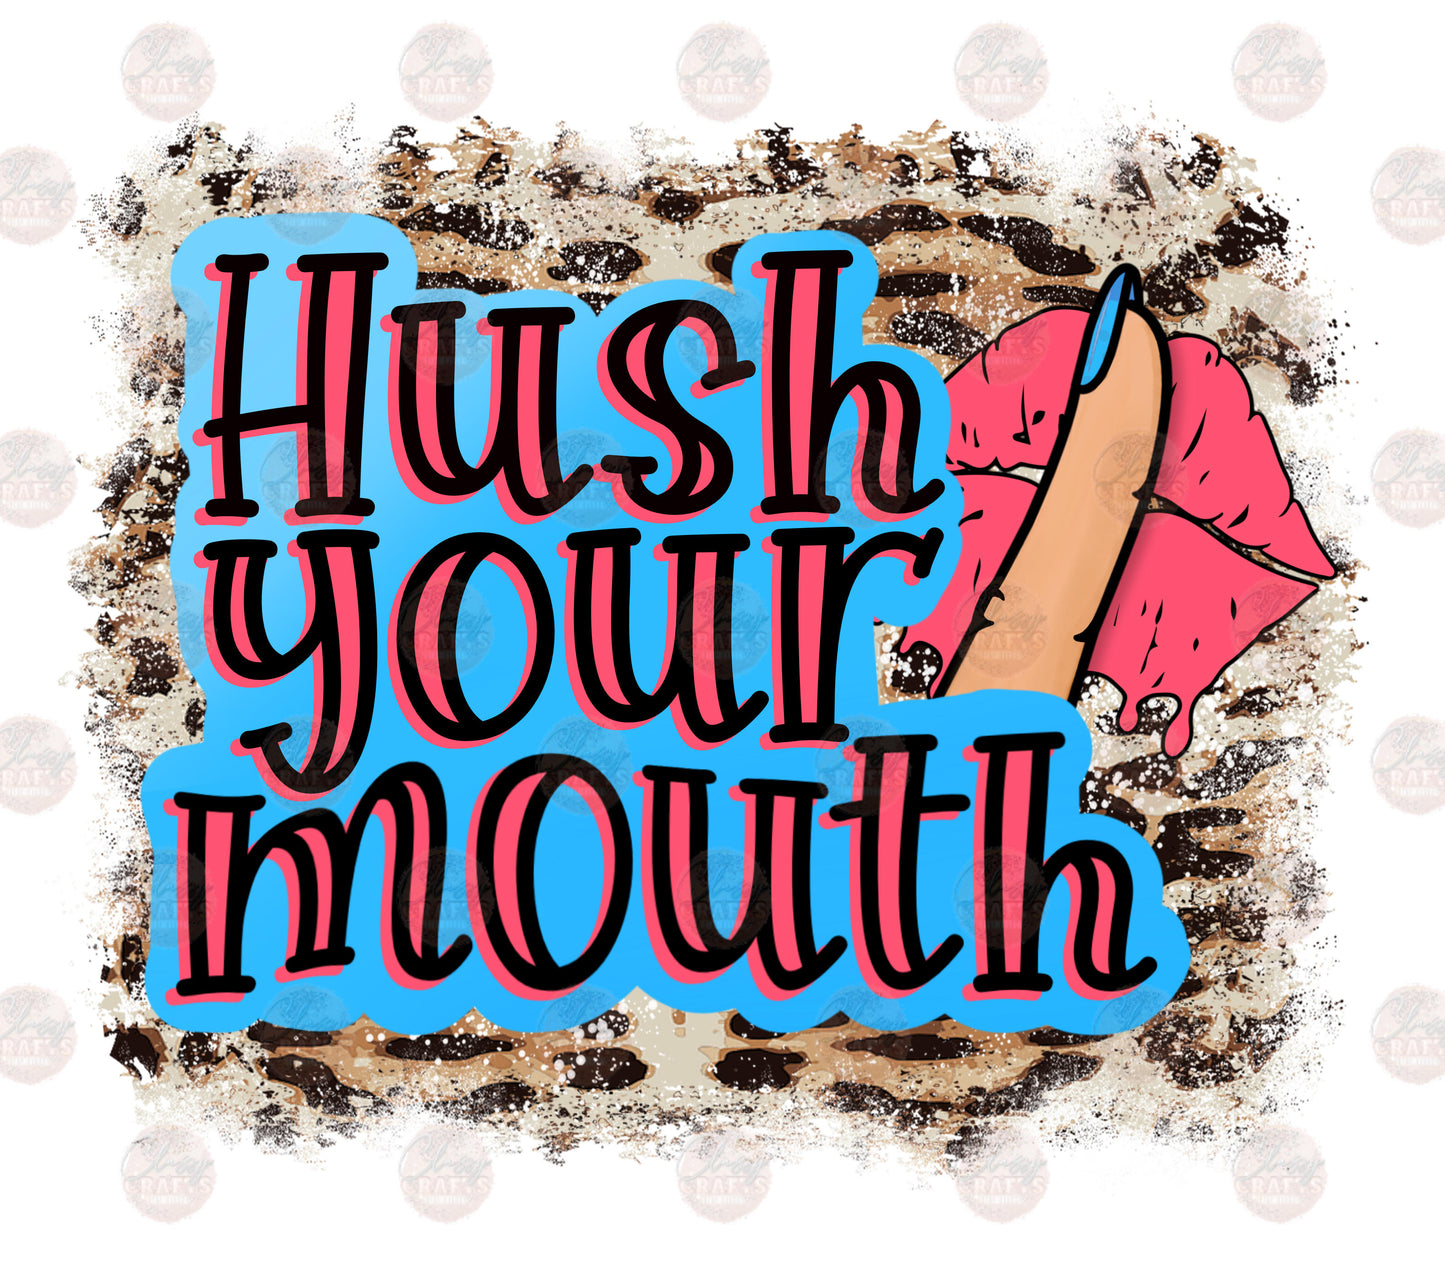 Hush Your Mouth w/Background - Sublimation Transfer